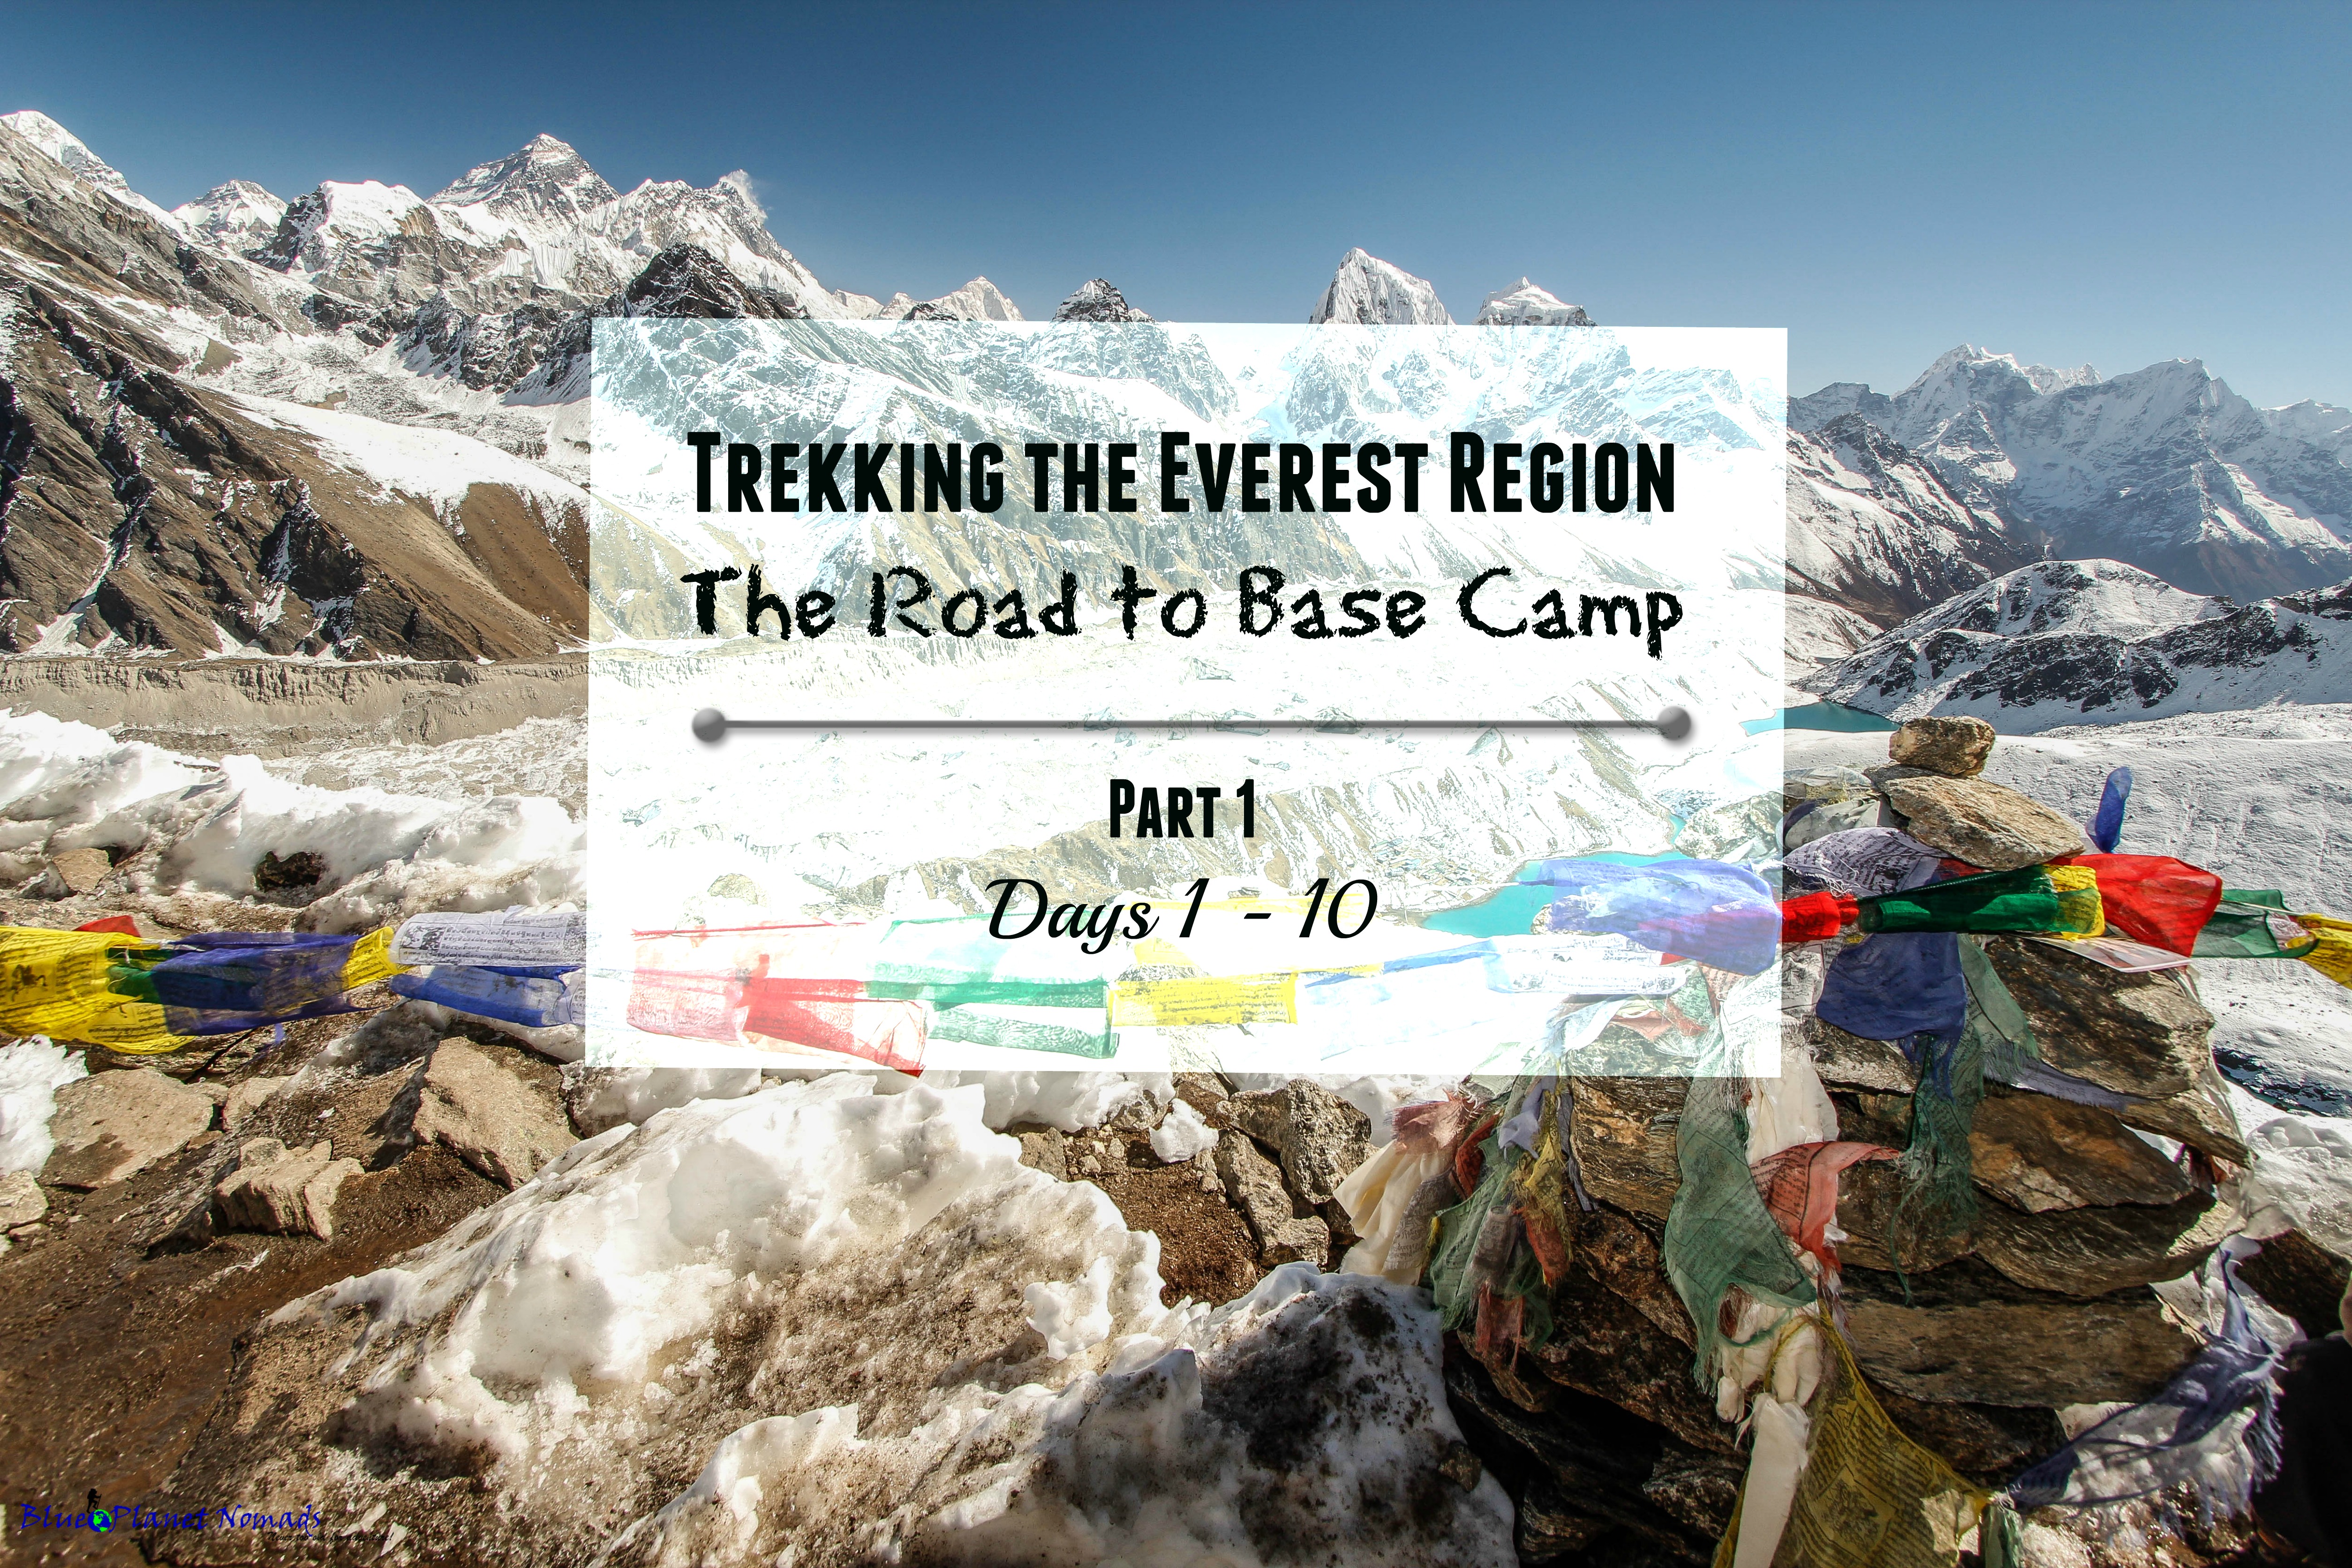 Trekking the Everest Region – The Road to Base Camp Part 1 (Days 1 to 10)